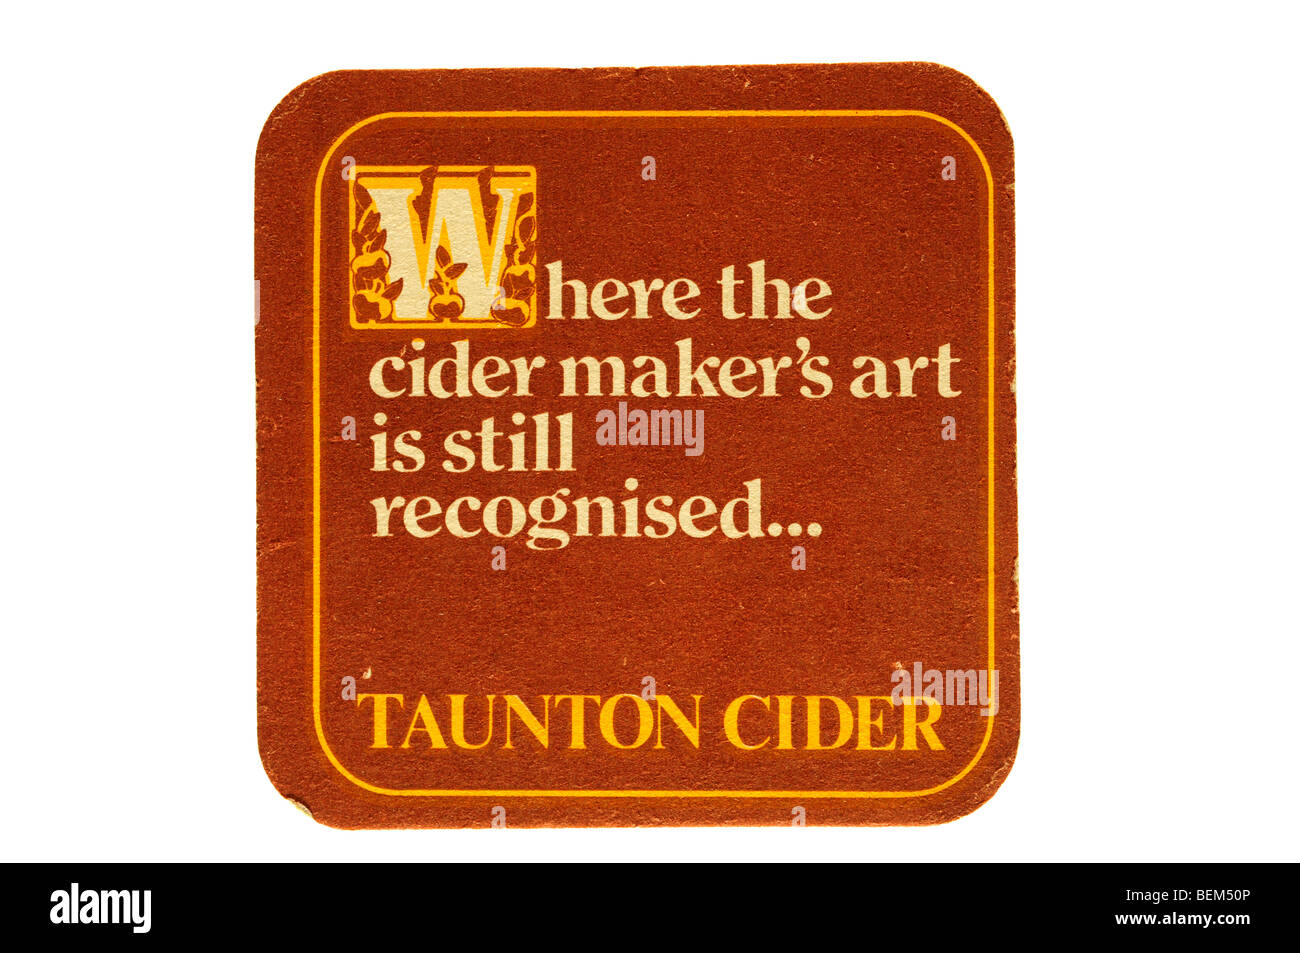 where the cider makers art is still recognised taunten cider Stock Photo